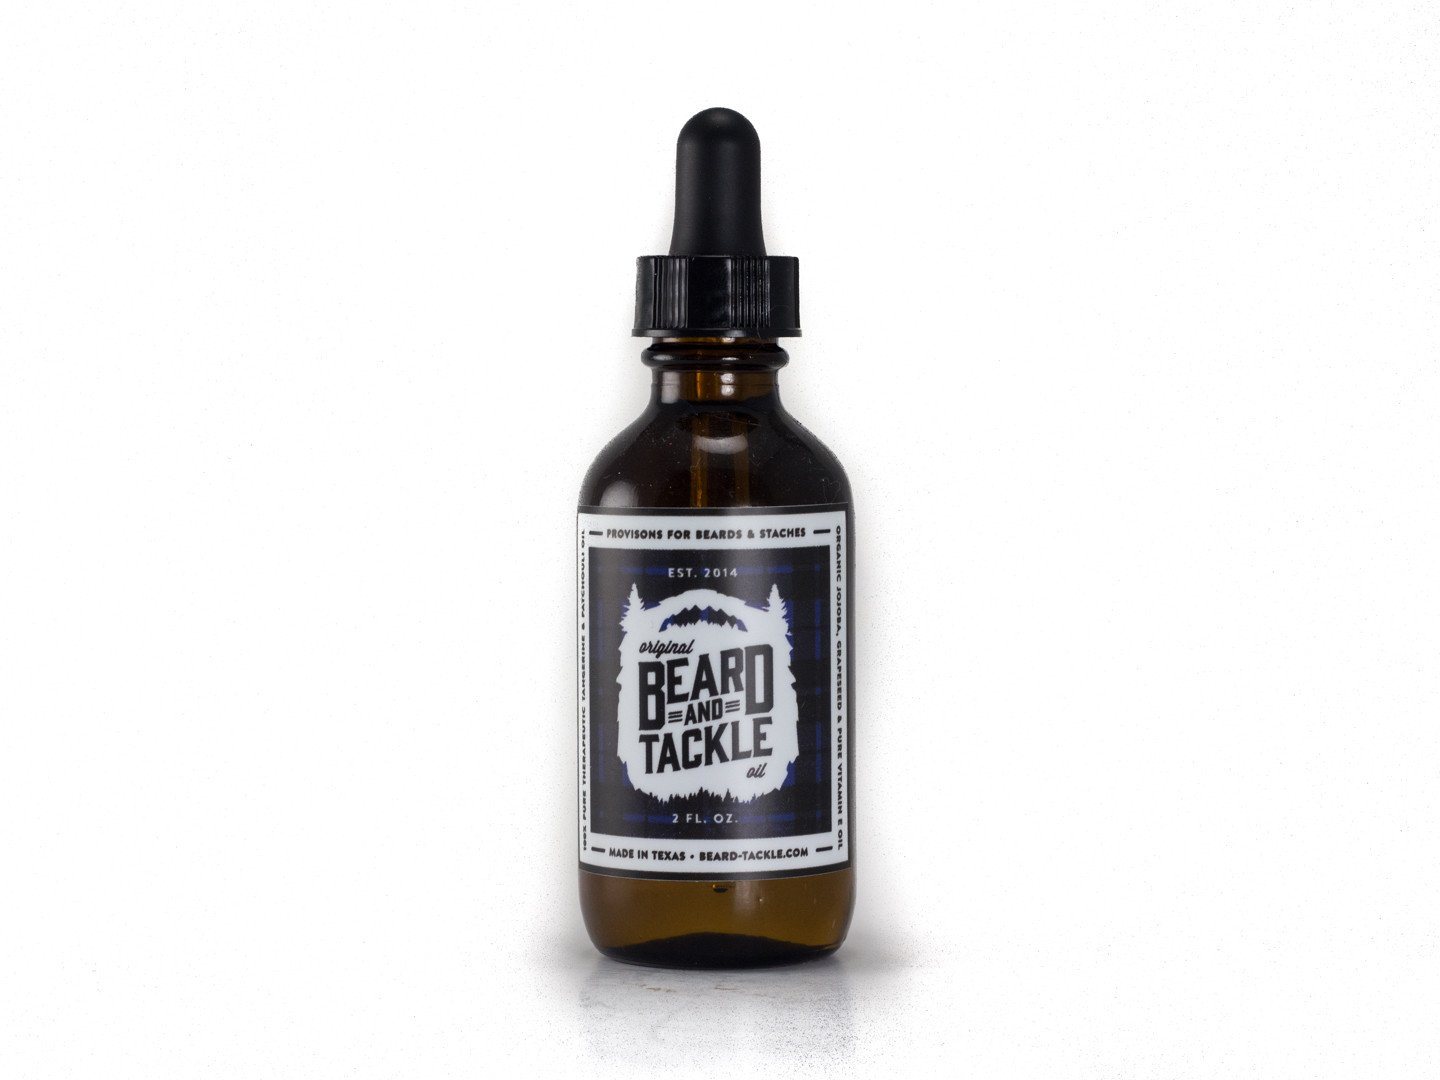 Beard and Tackle Beard Oil - White Rock Soap Gallery